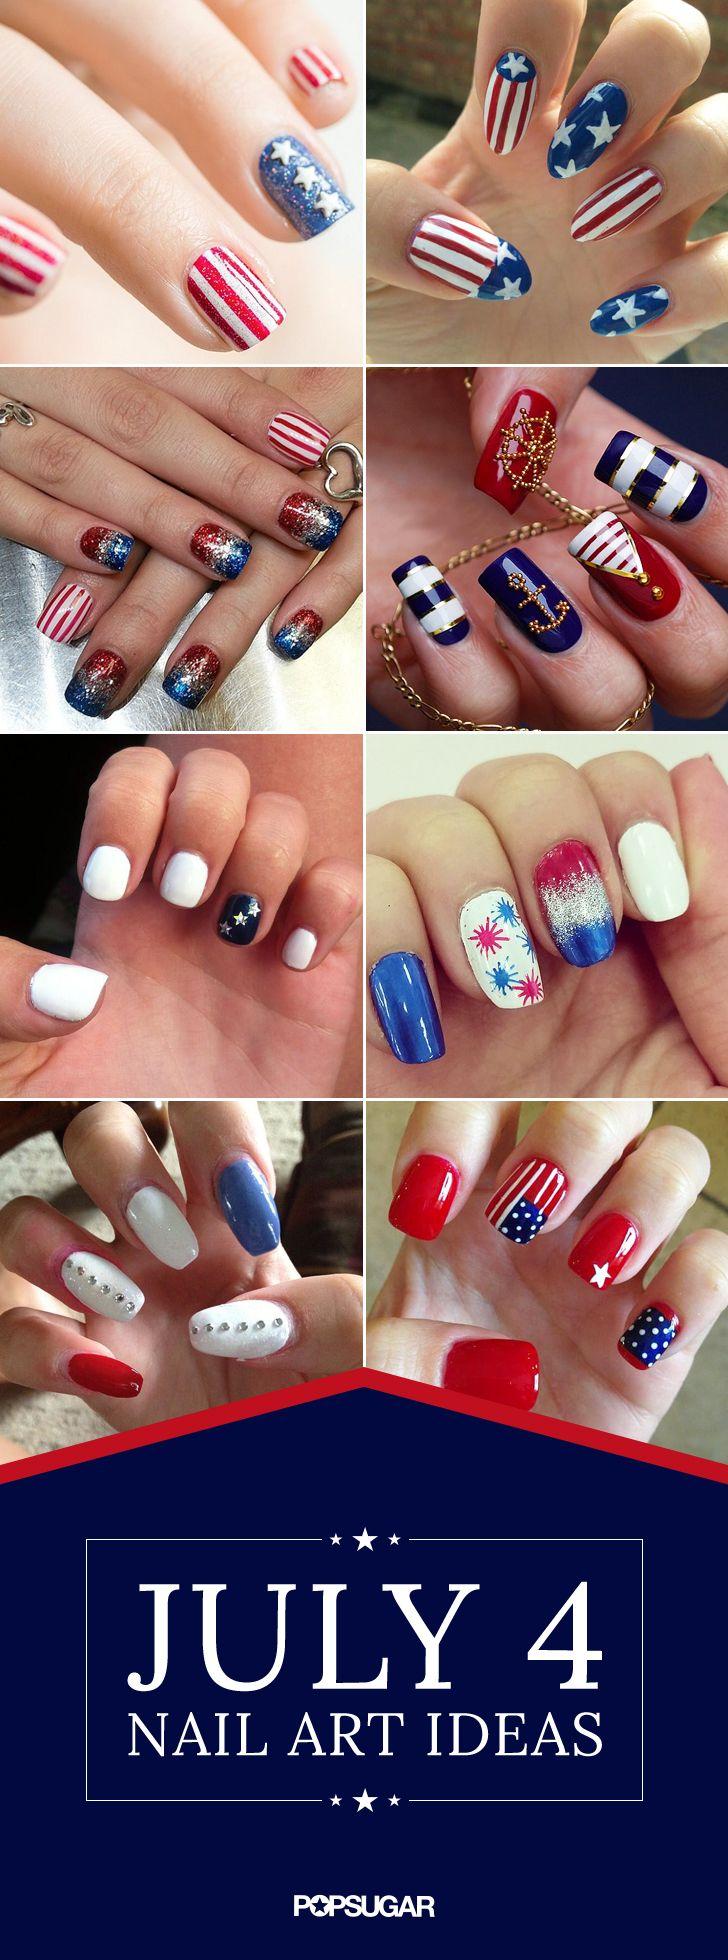 Mariage - Even More Inspiration For Your July 4 Nail Art